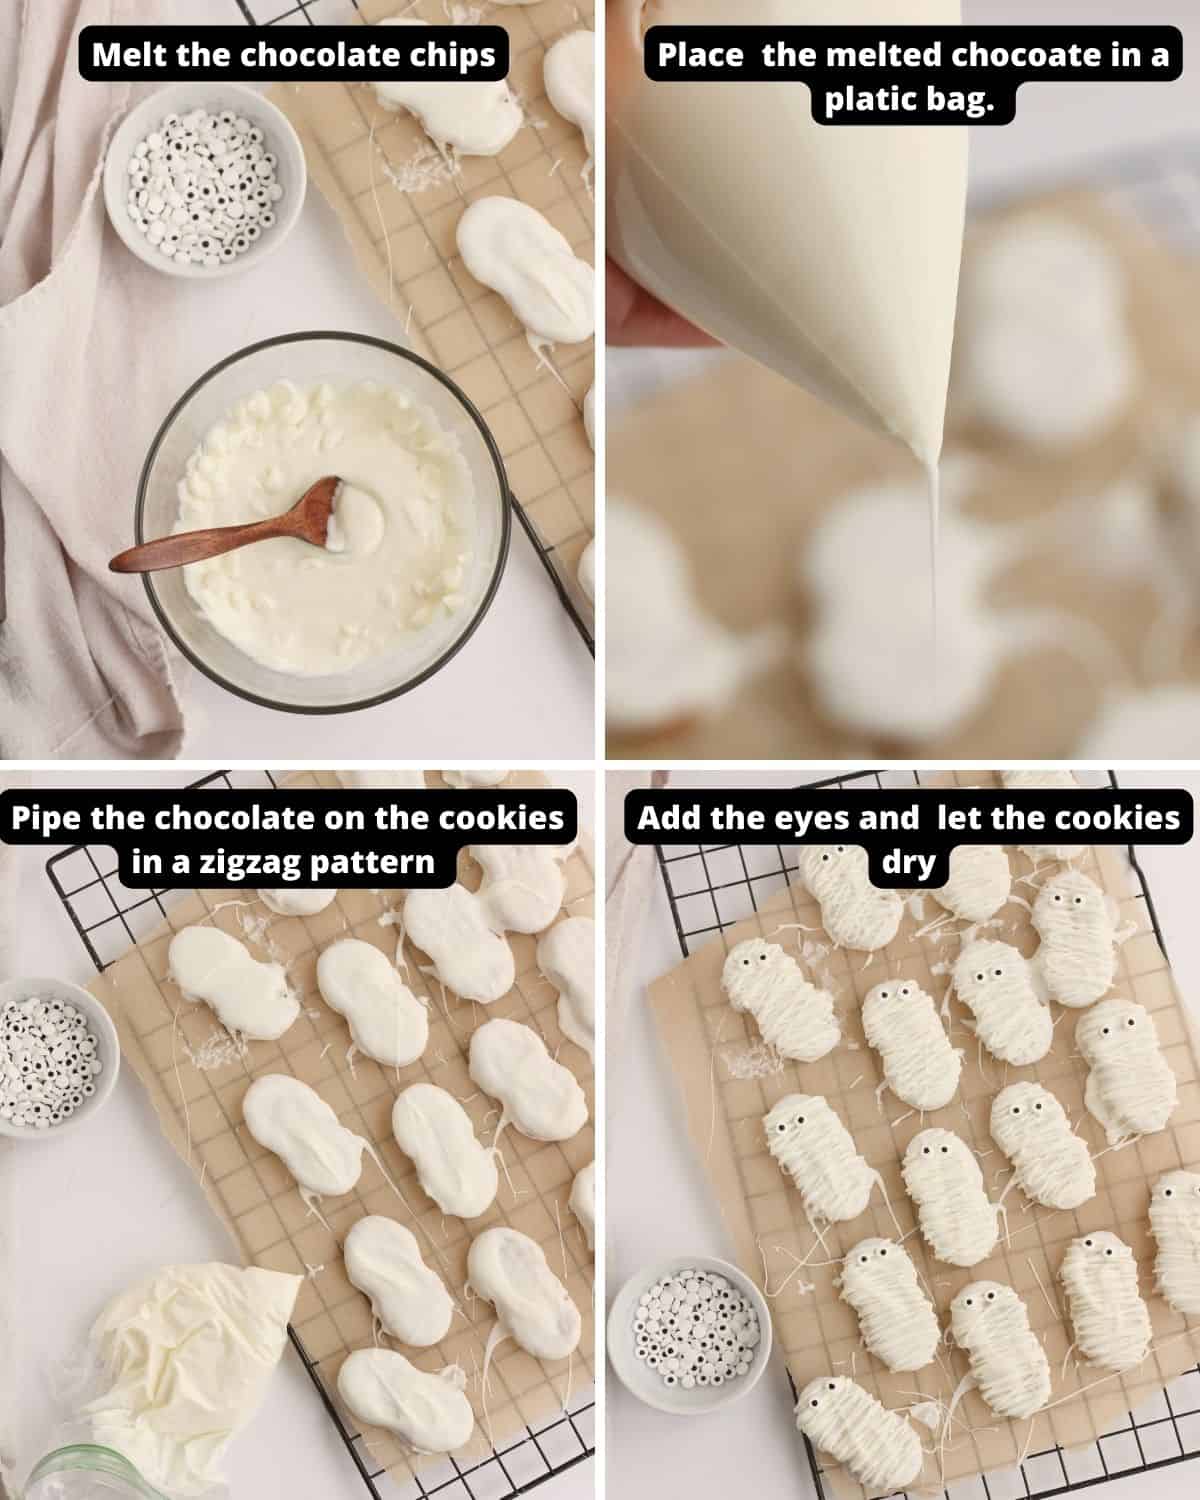 The last steps to make a mummy pattern on nutter butter cookies. 